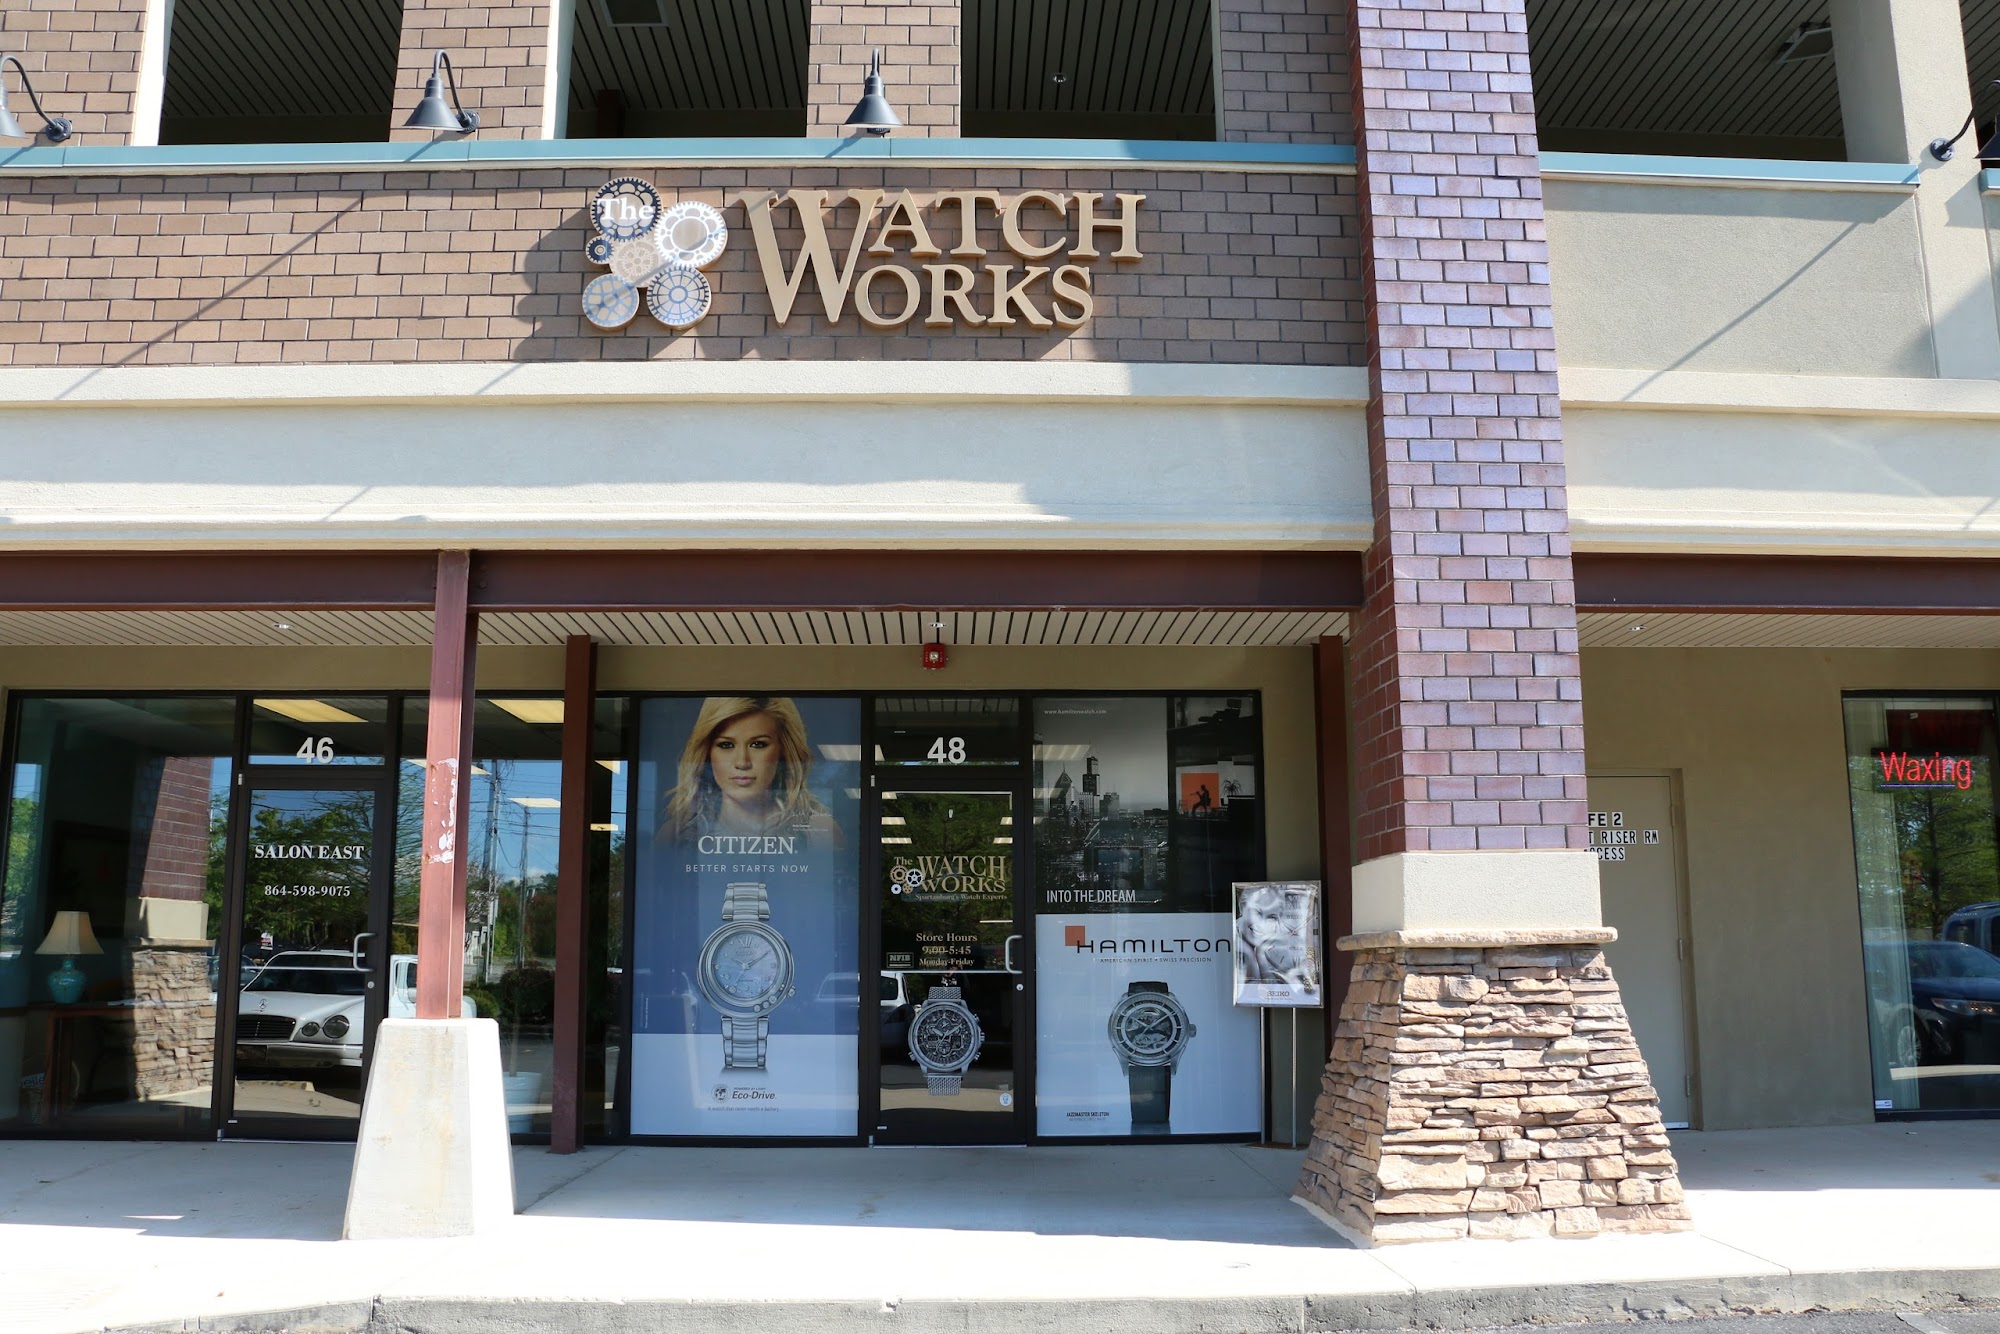 The WatchWorks